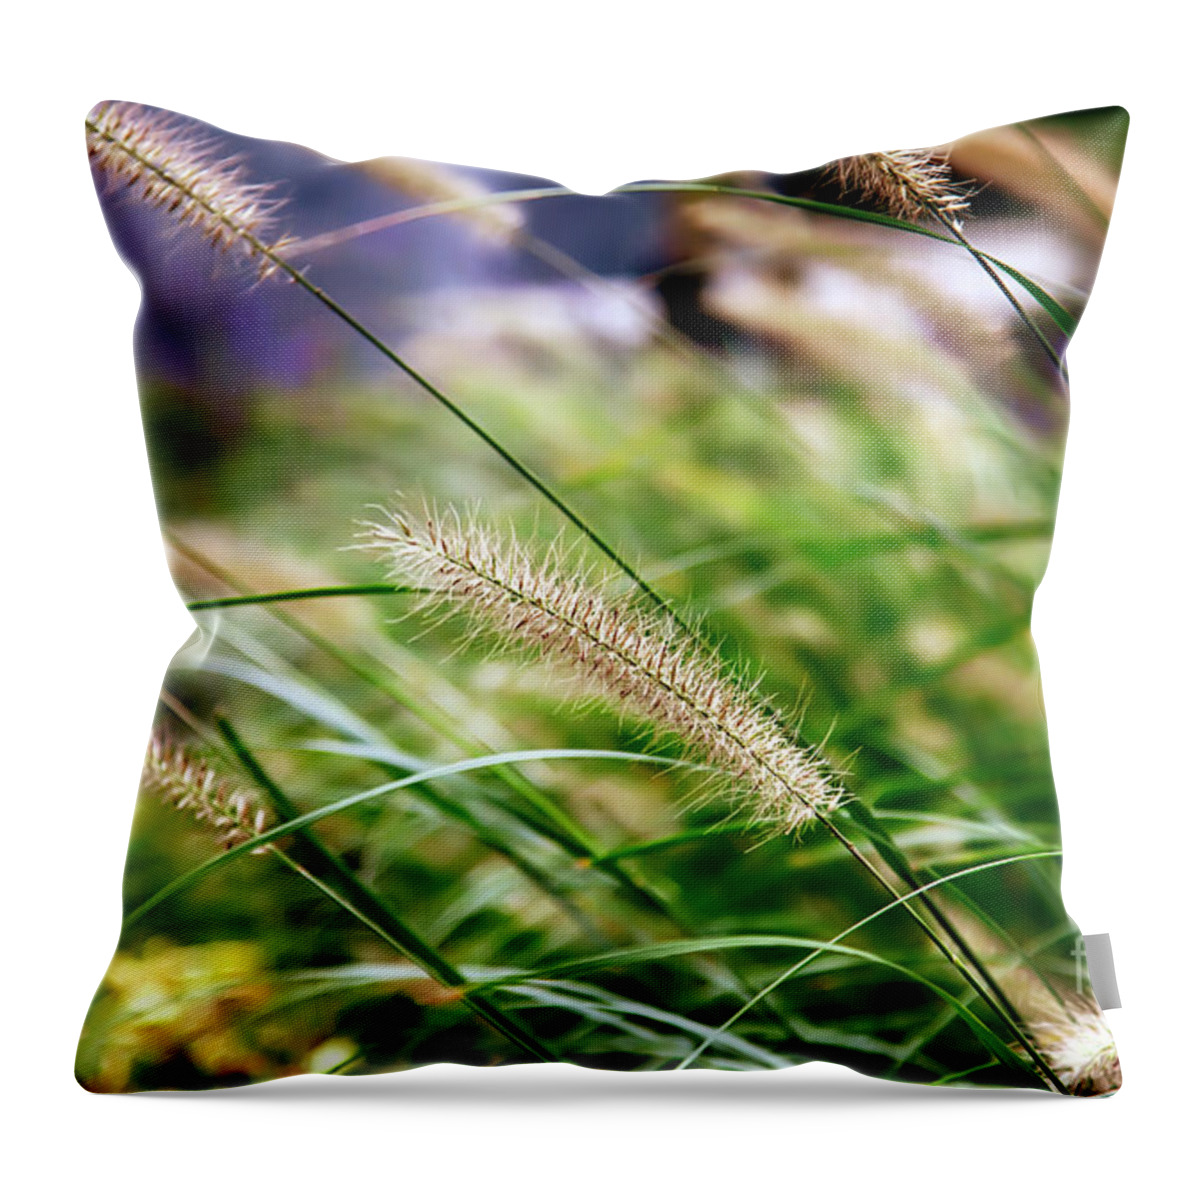 Nature Throw Pillow featuring the photograph Nature Background by Ariadna De Raadt